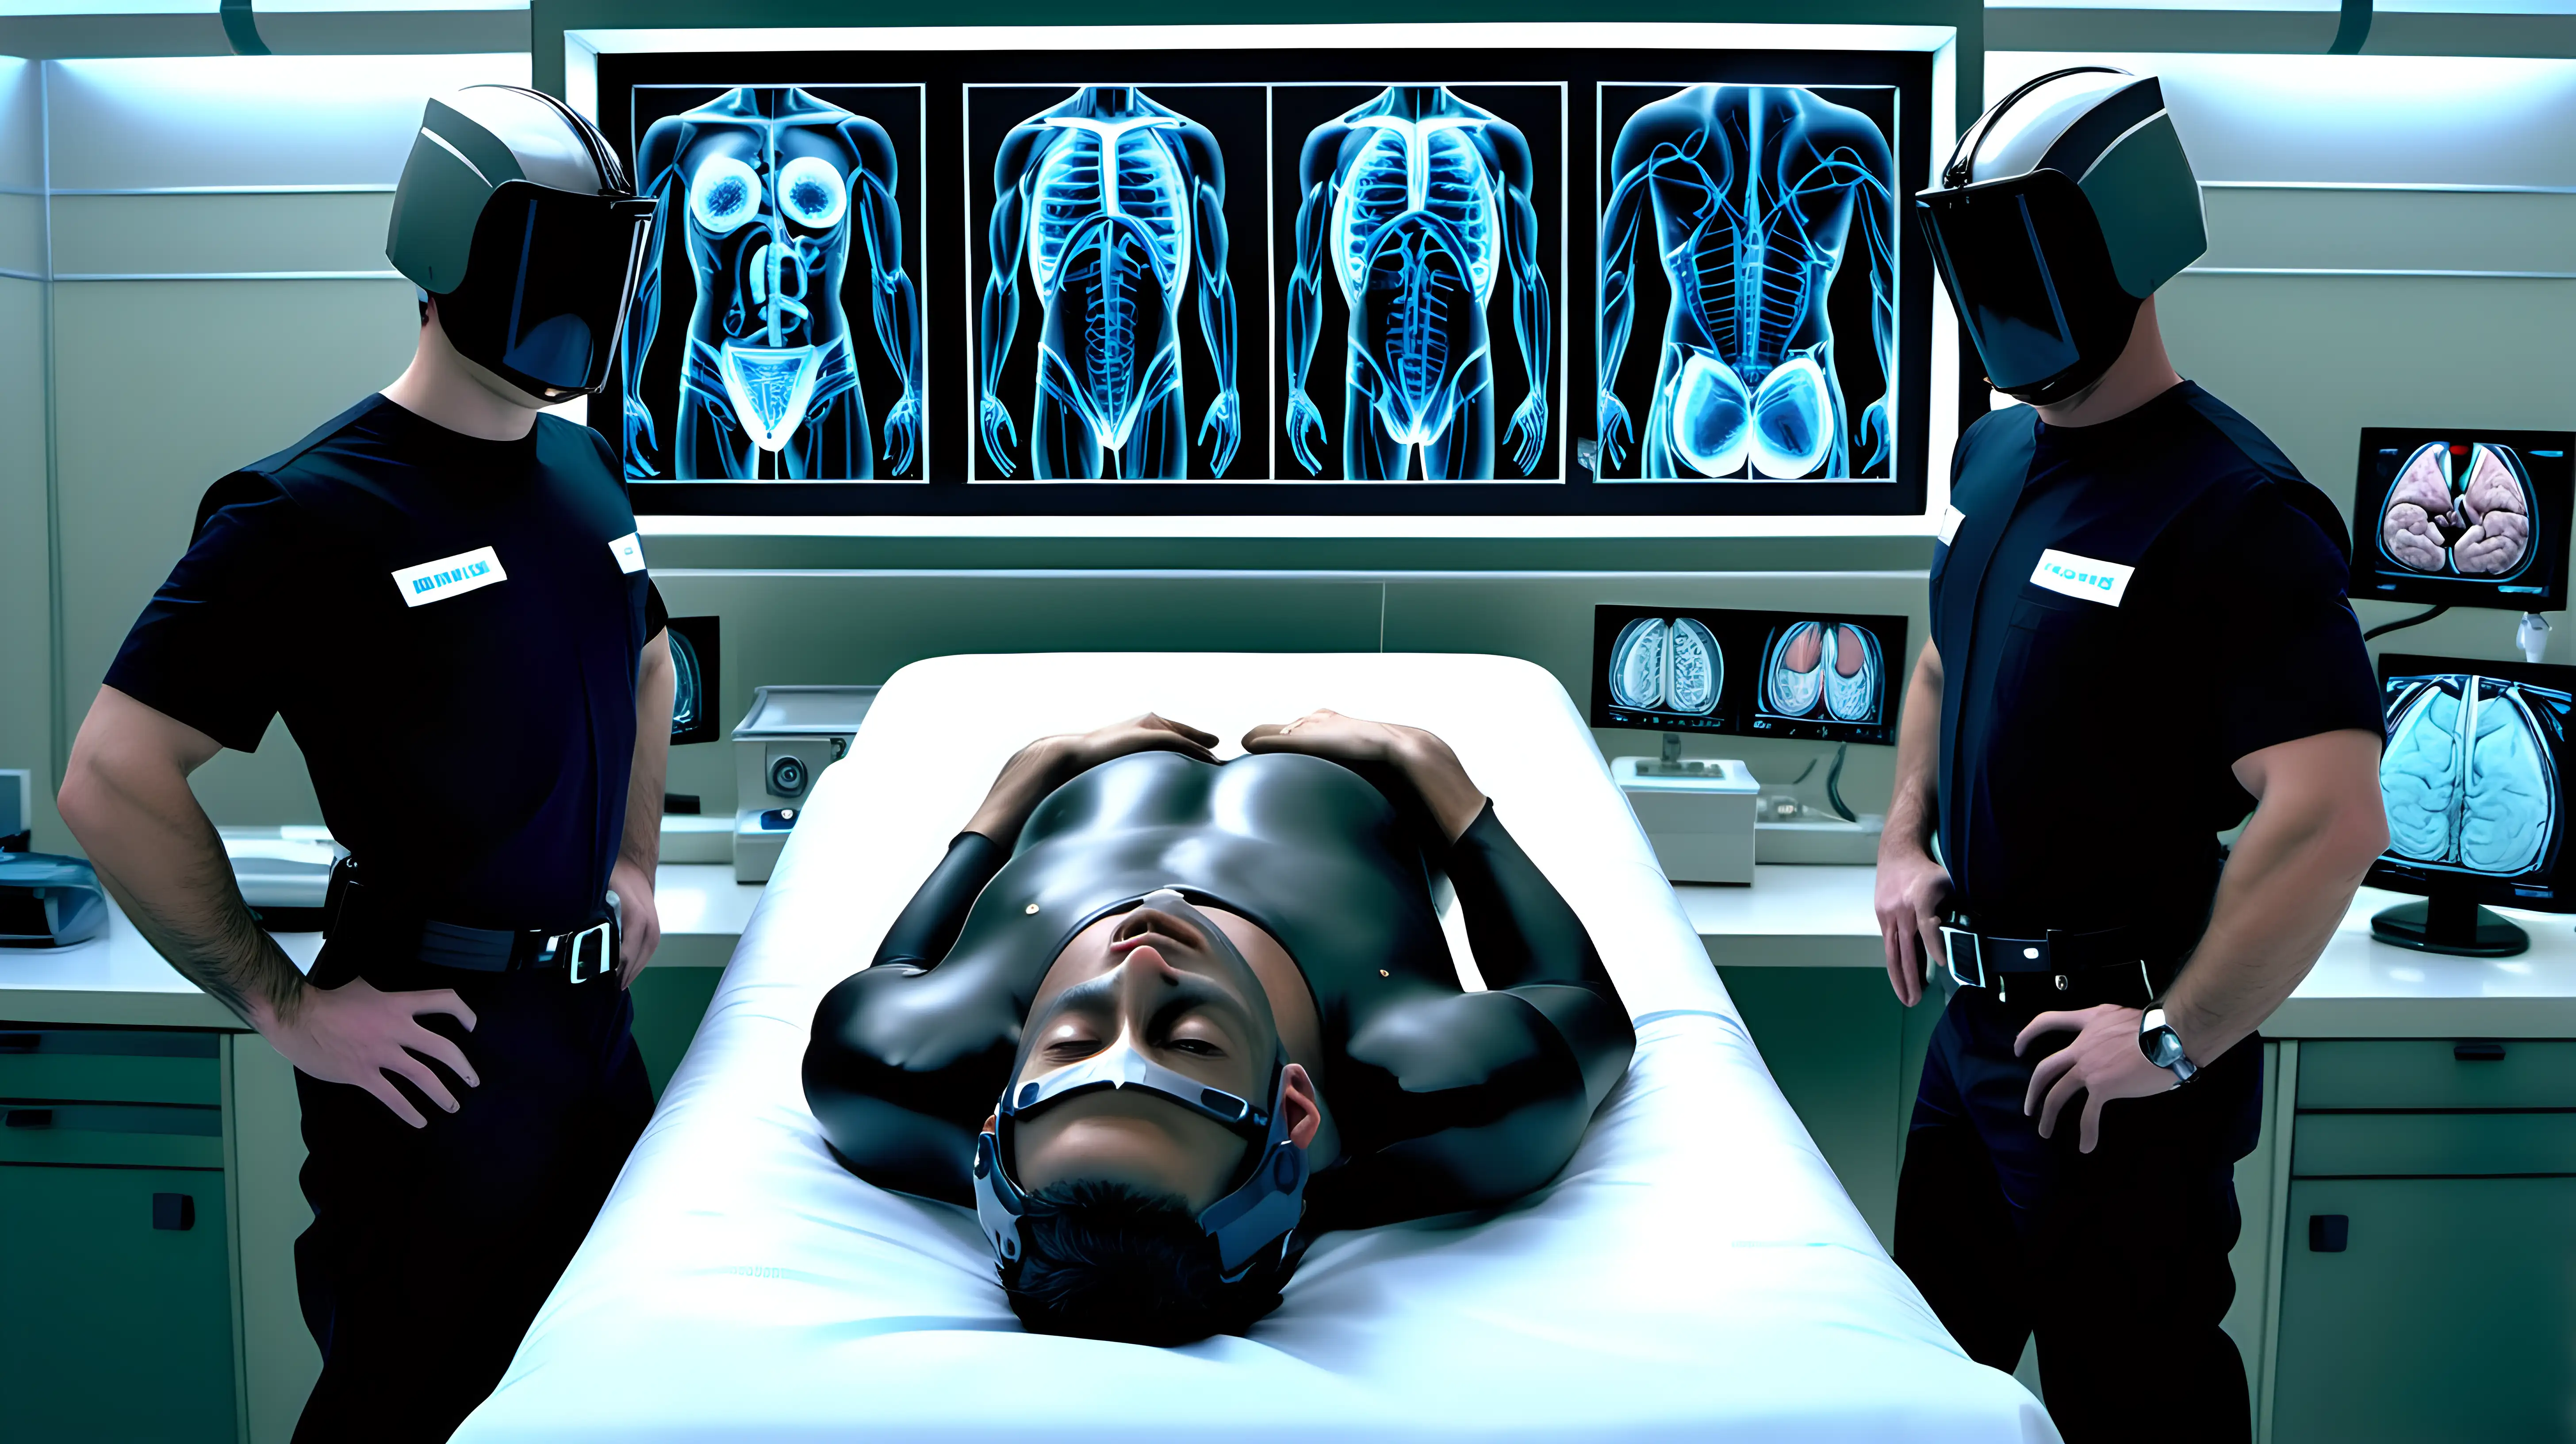 facing forward three men wearing only tight black rubber underwear stand side by side behind a medical exam table with a man laying flat on his back on the exam table wearing only a pair of black rubber underwear and tight fitting police helmet on his head in a futuristic high tech medical research laboratory with larges screens in the background showing images of human male bodies and brains, --ar 2:3 --v 6.0